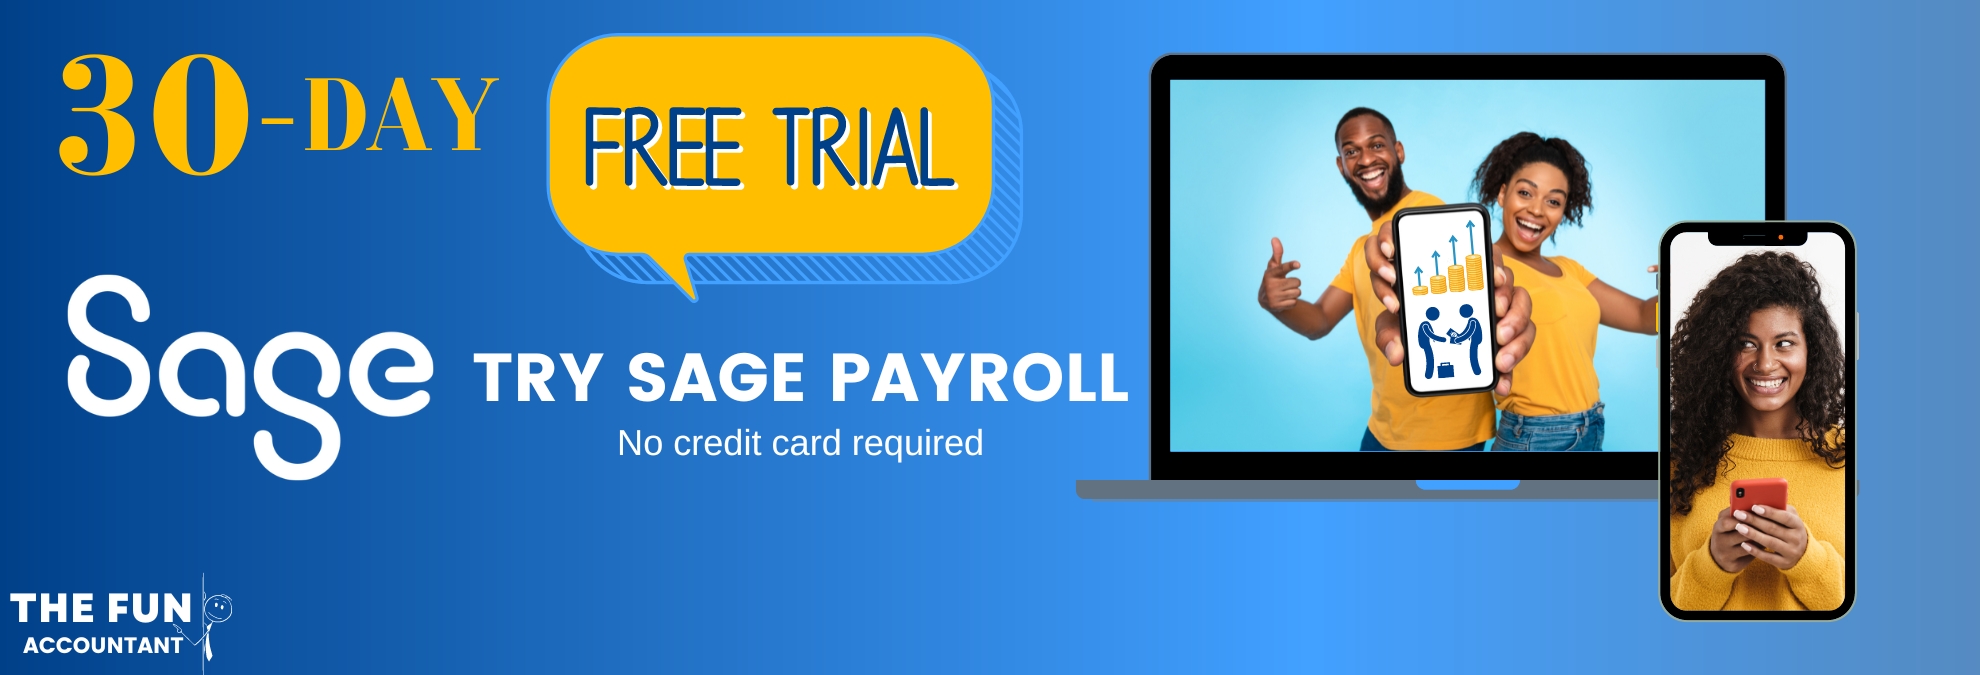 Sage Payroll 30-day-free trial by The Fun Accountant.